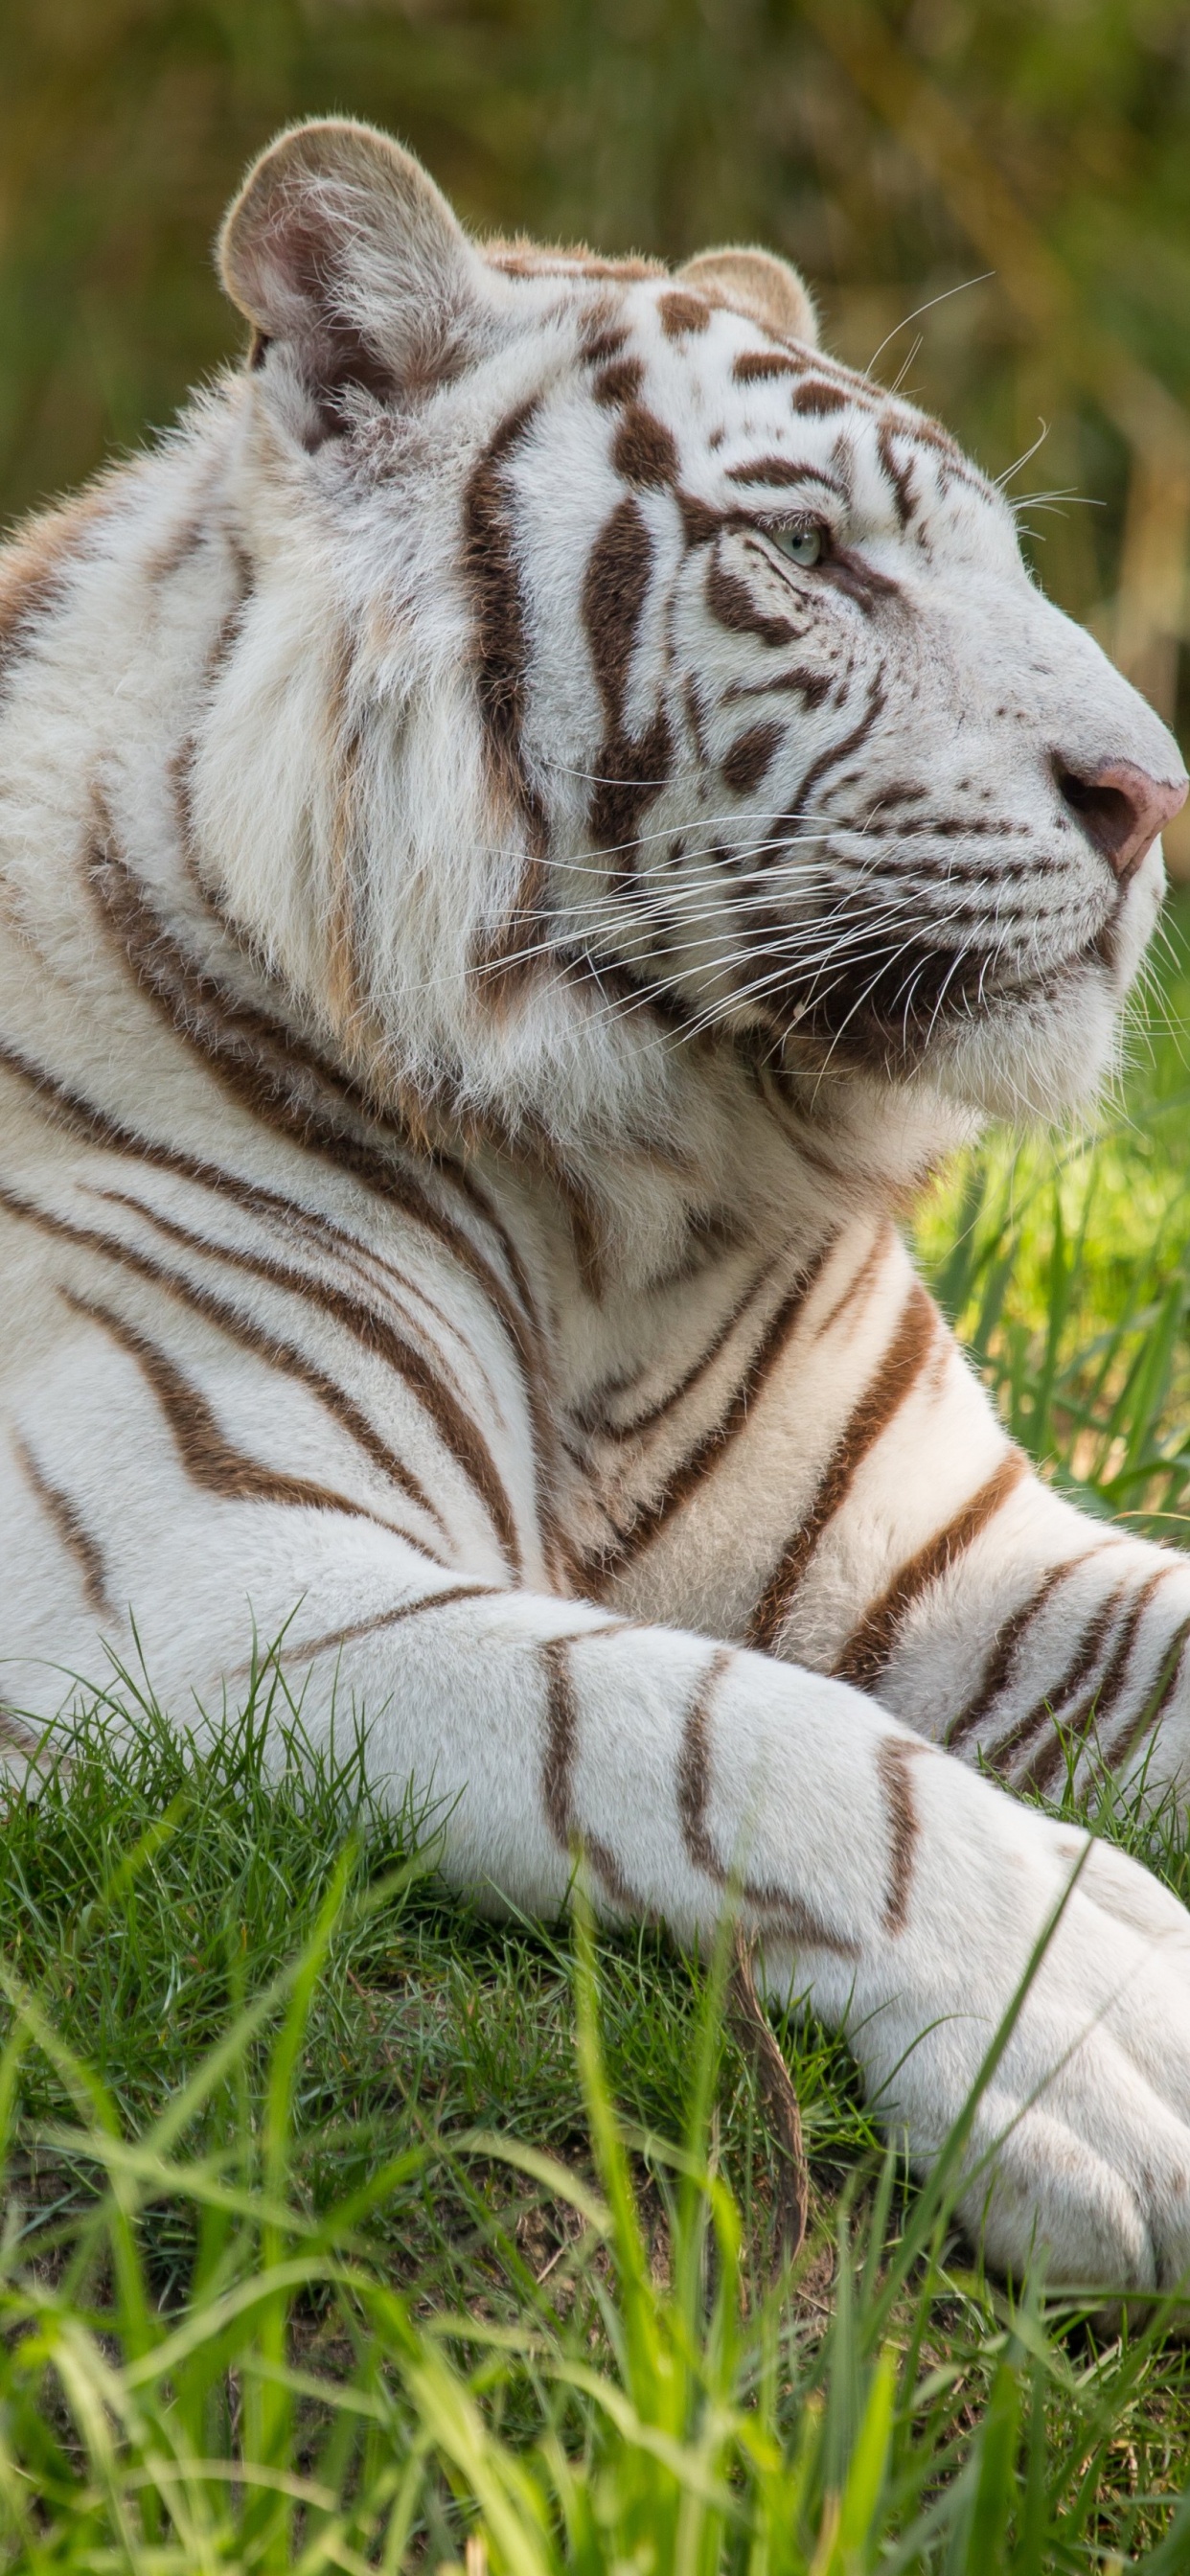 White and Black Tiger Lying on Green Grass During Daytime. Wallpaper in 1242x2688 Resolution